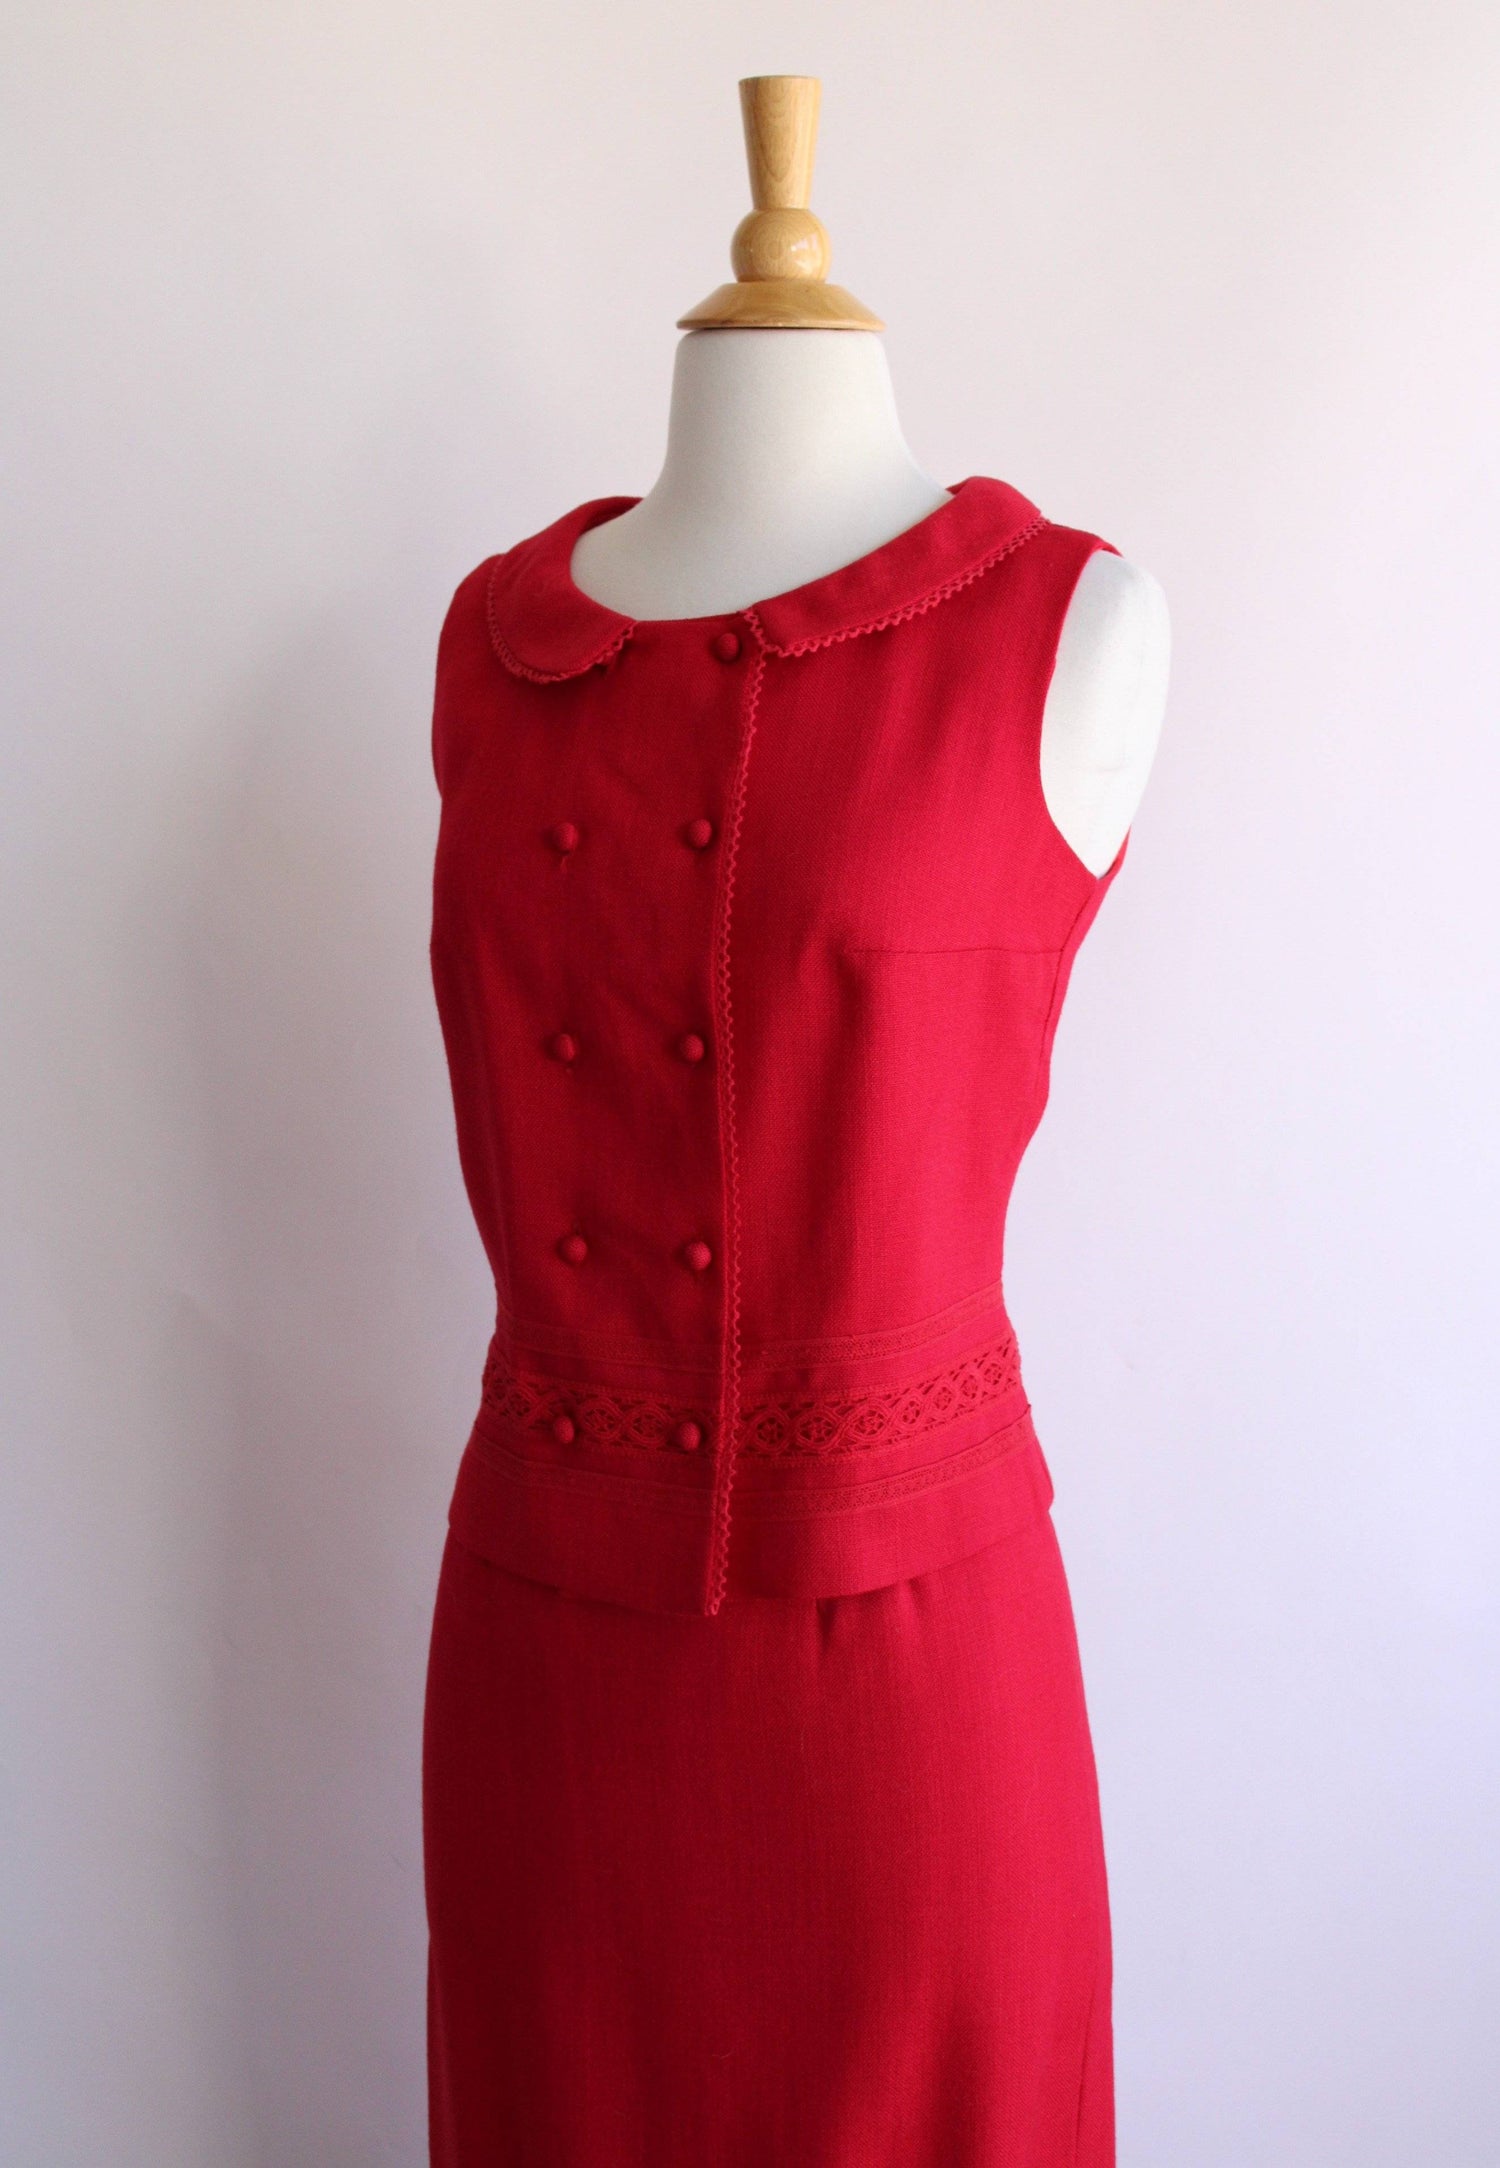 Vintage 1960s Two Piece Outfit Separates, Campus Casuals-Toadstool Farm Vintage-barkcloth,boxy top,campus casuals,pencil skirt,red,Separates,seperates,suit,two piece,Vintage,Vintage Clothing